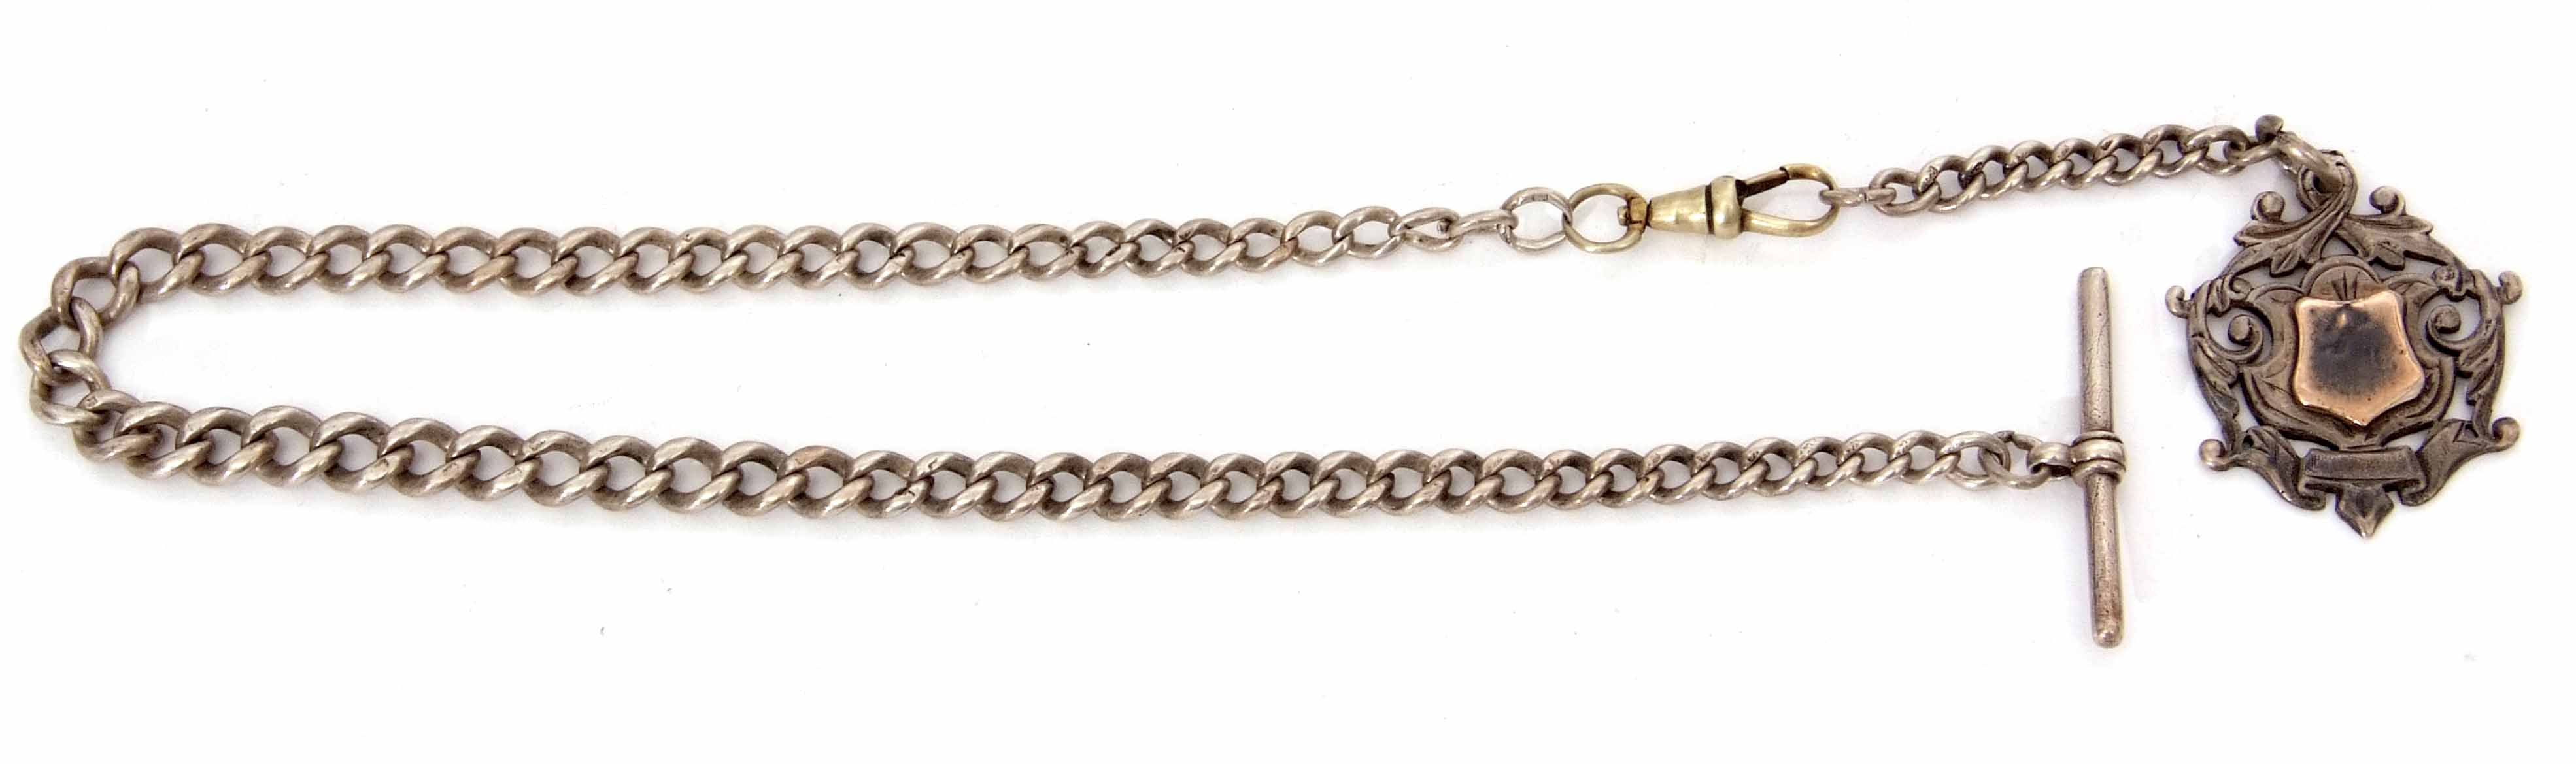 Late 19th century silver graduated curb link watch chain set with base metal swivel and with T-bar